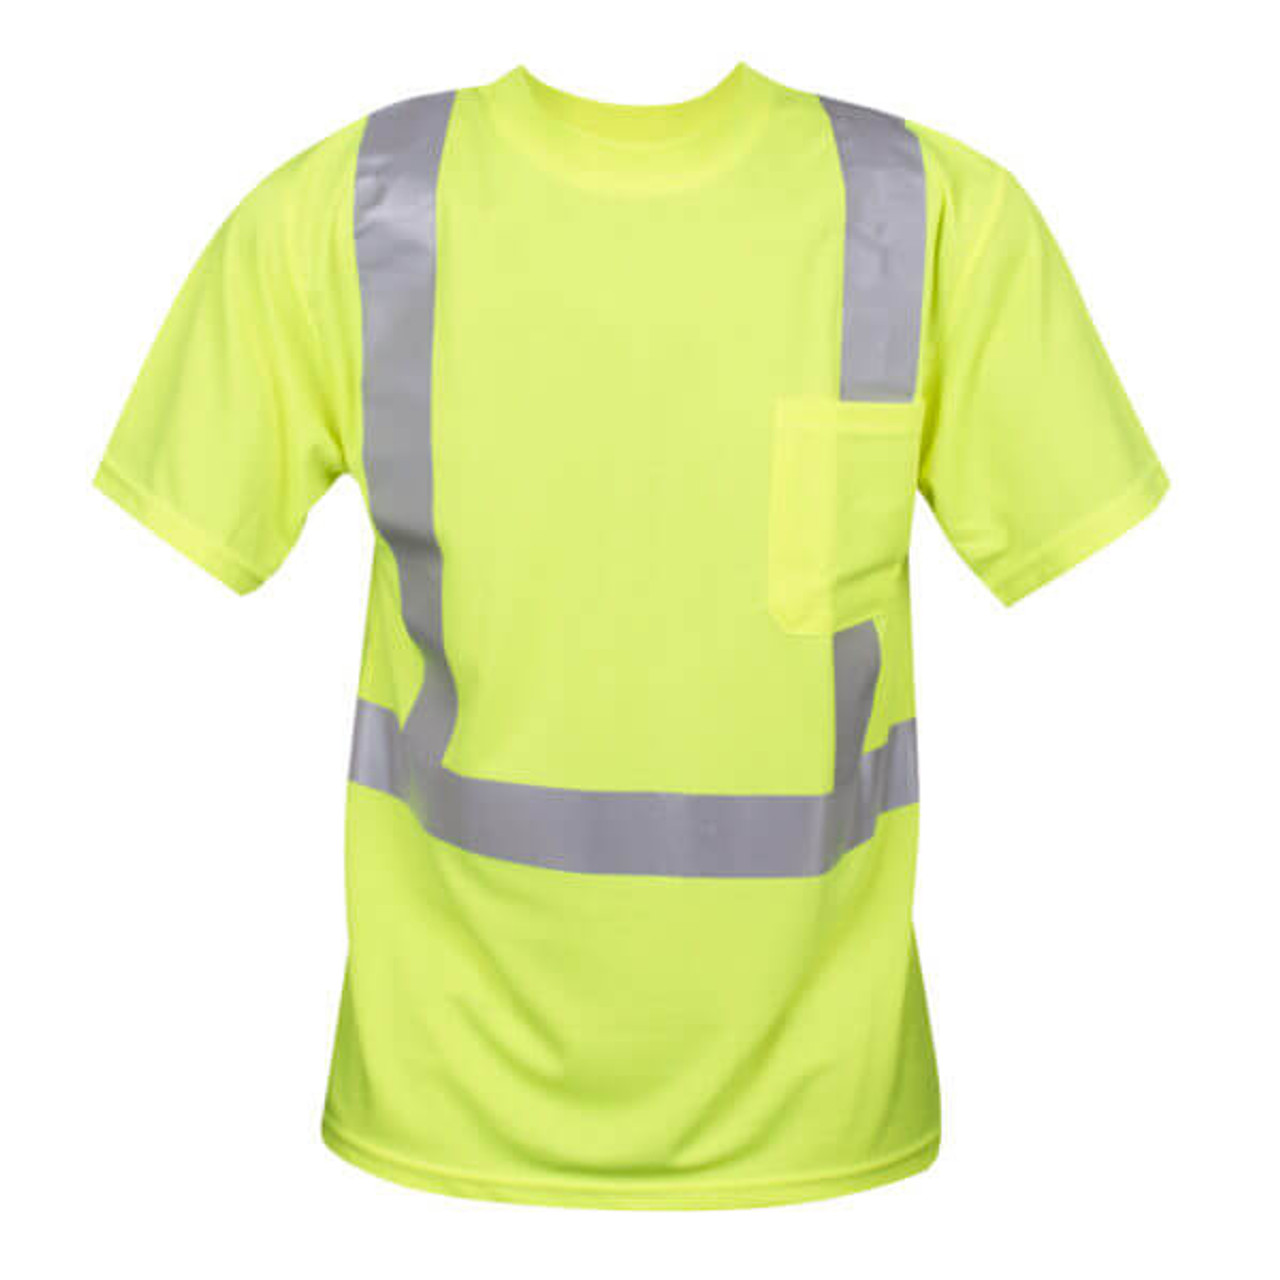 Safety Shirts With Stripes - Reflective Apparel